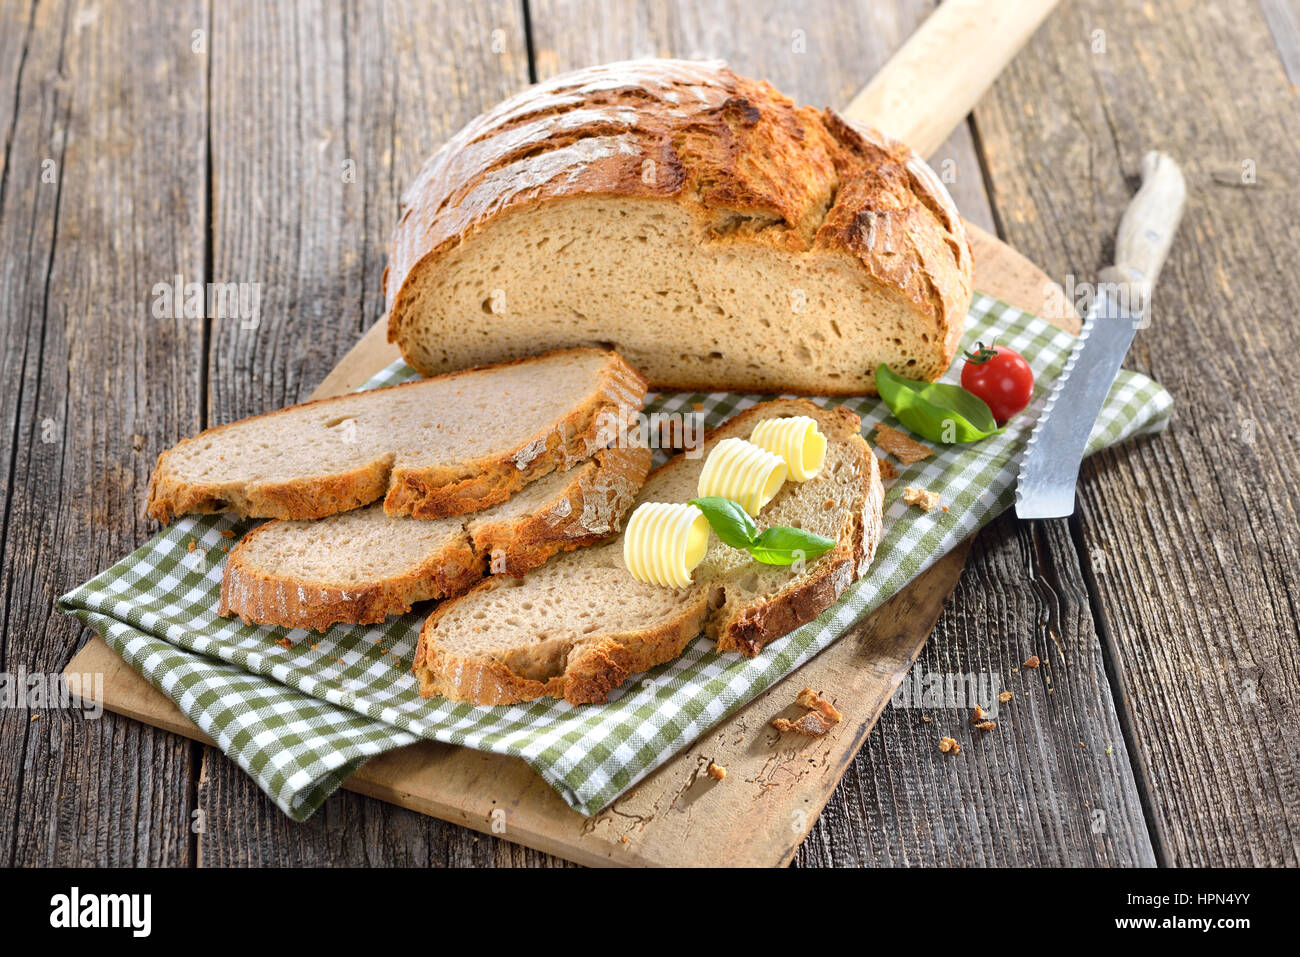 Fresh stone oven baked bread with butter rolls served on an old wooden baking board Stock Photo